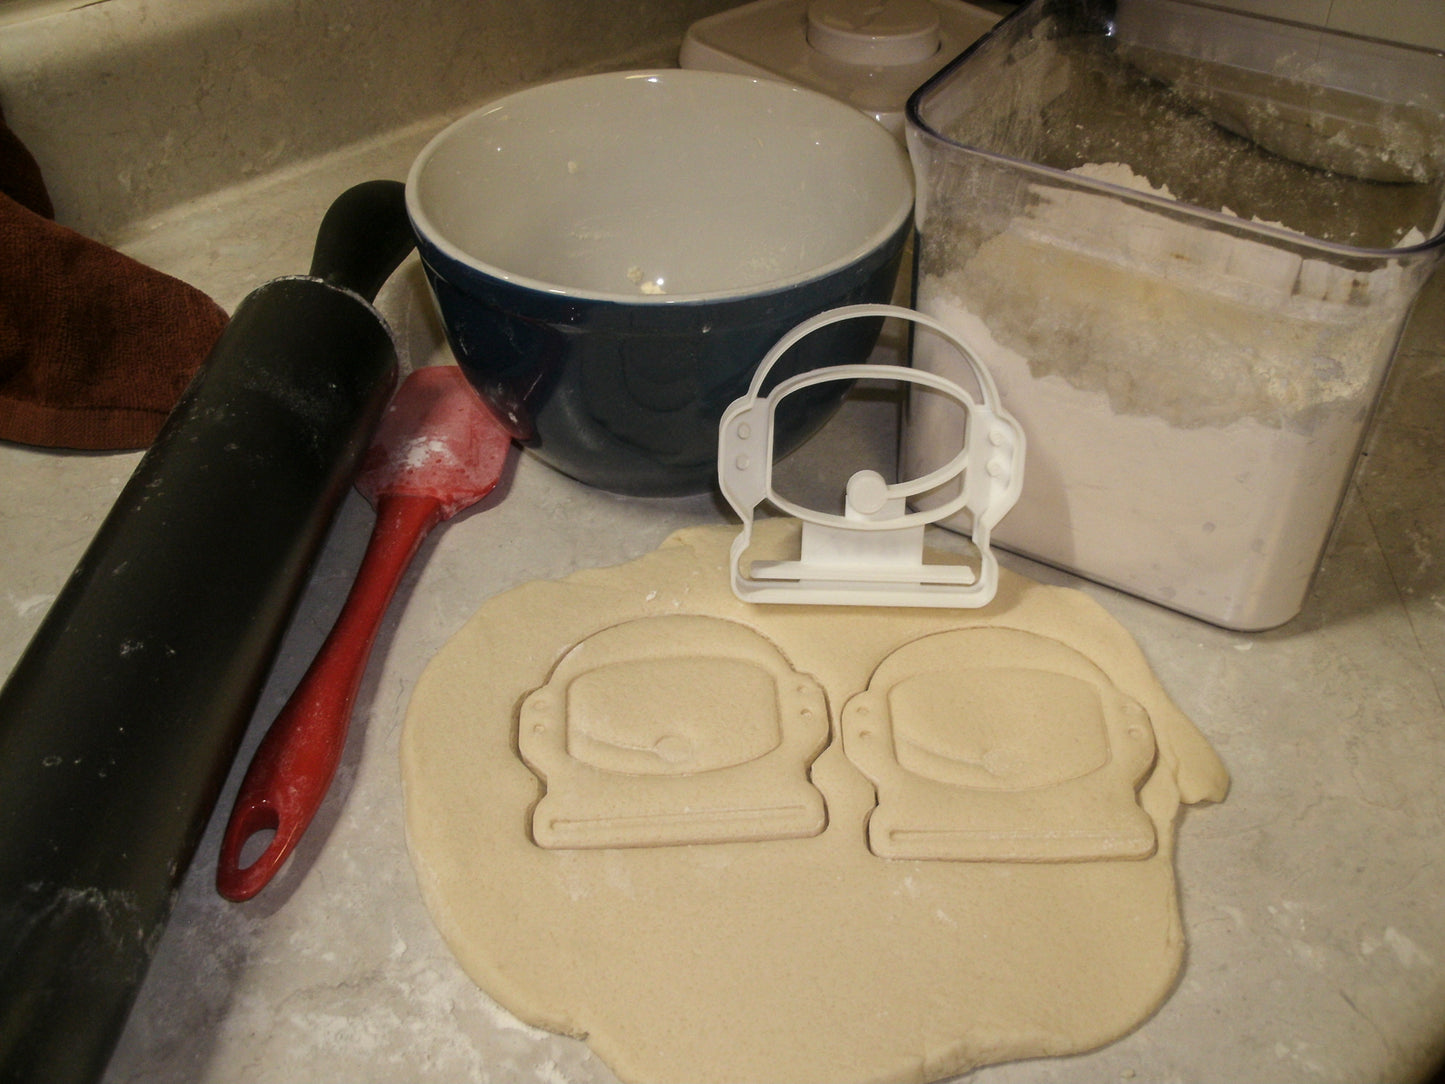 Astronaut Space Helmet Cookie Cutter 3D Printed Made In USA PR847